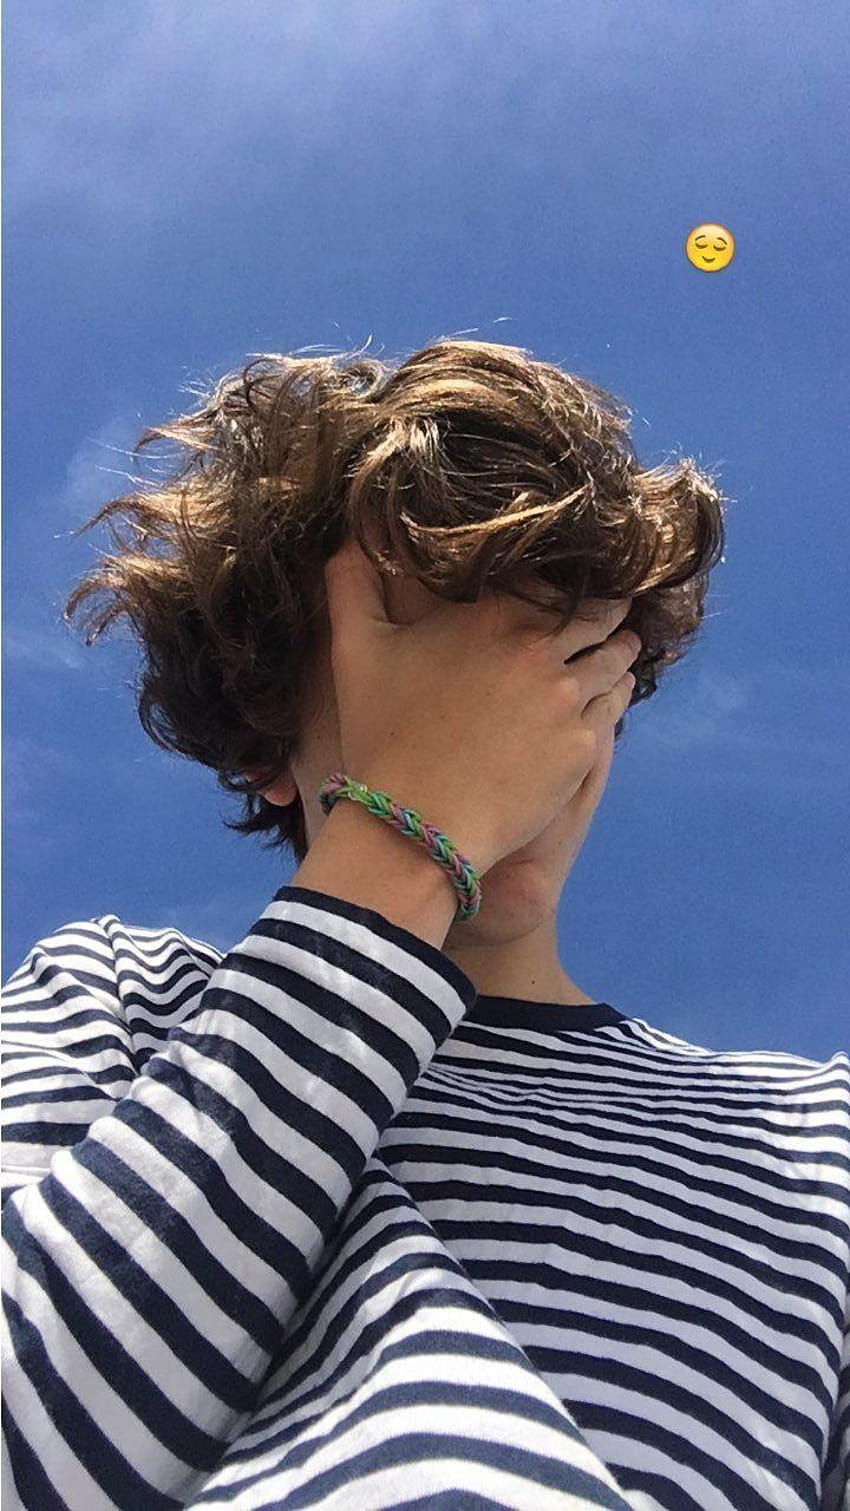 A boy with his hands over face in front of blue sky - Timothee Chalamet